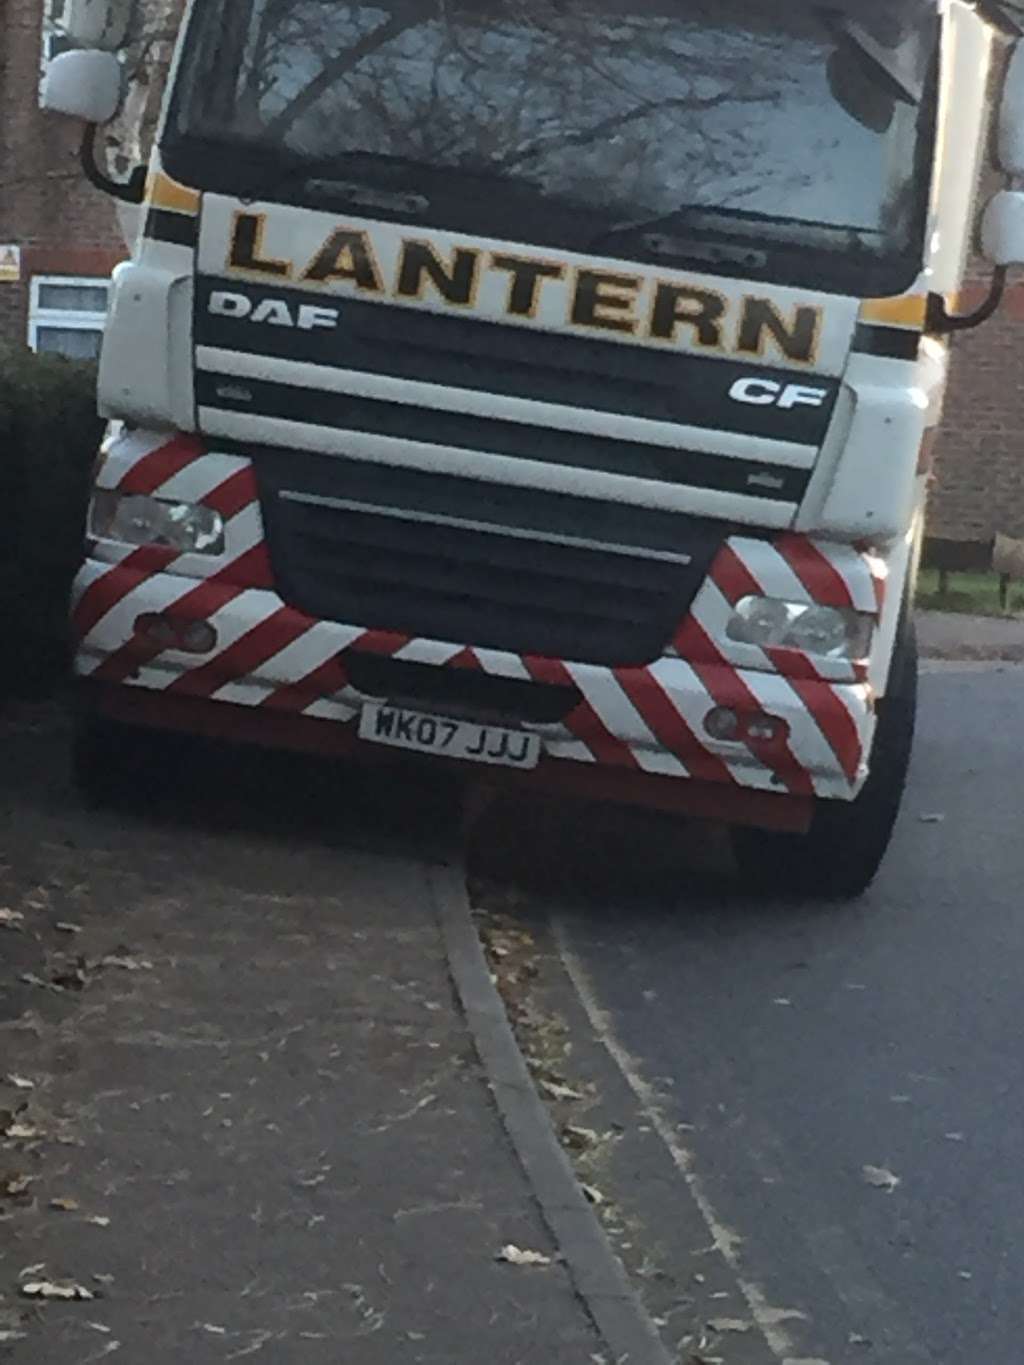 Lanterns Recovery Specialists Plc | Beacon Service Area, Swanland Rd, South Mimms, Potters Bar EN6 3NE, UK | Phone: 0844 247 6090